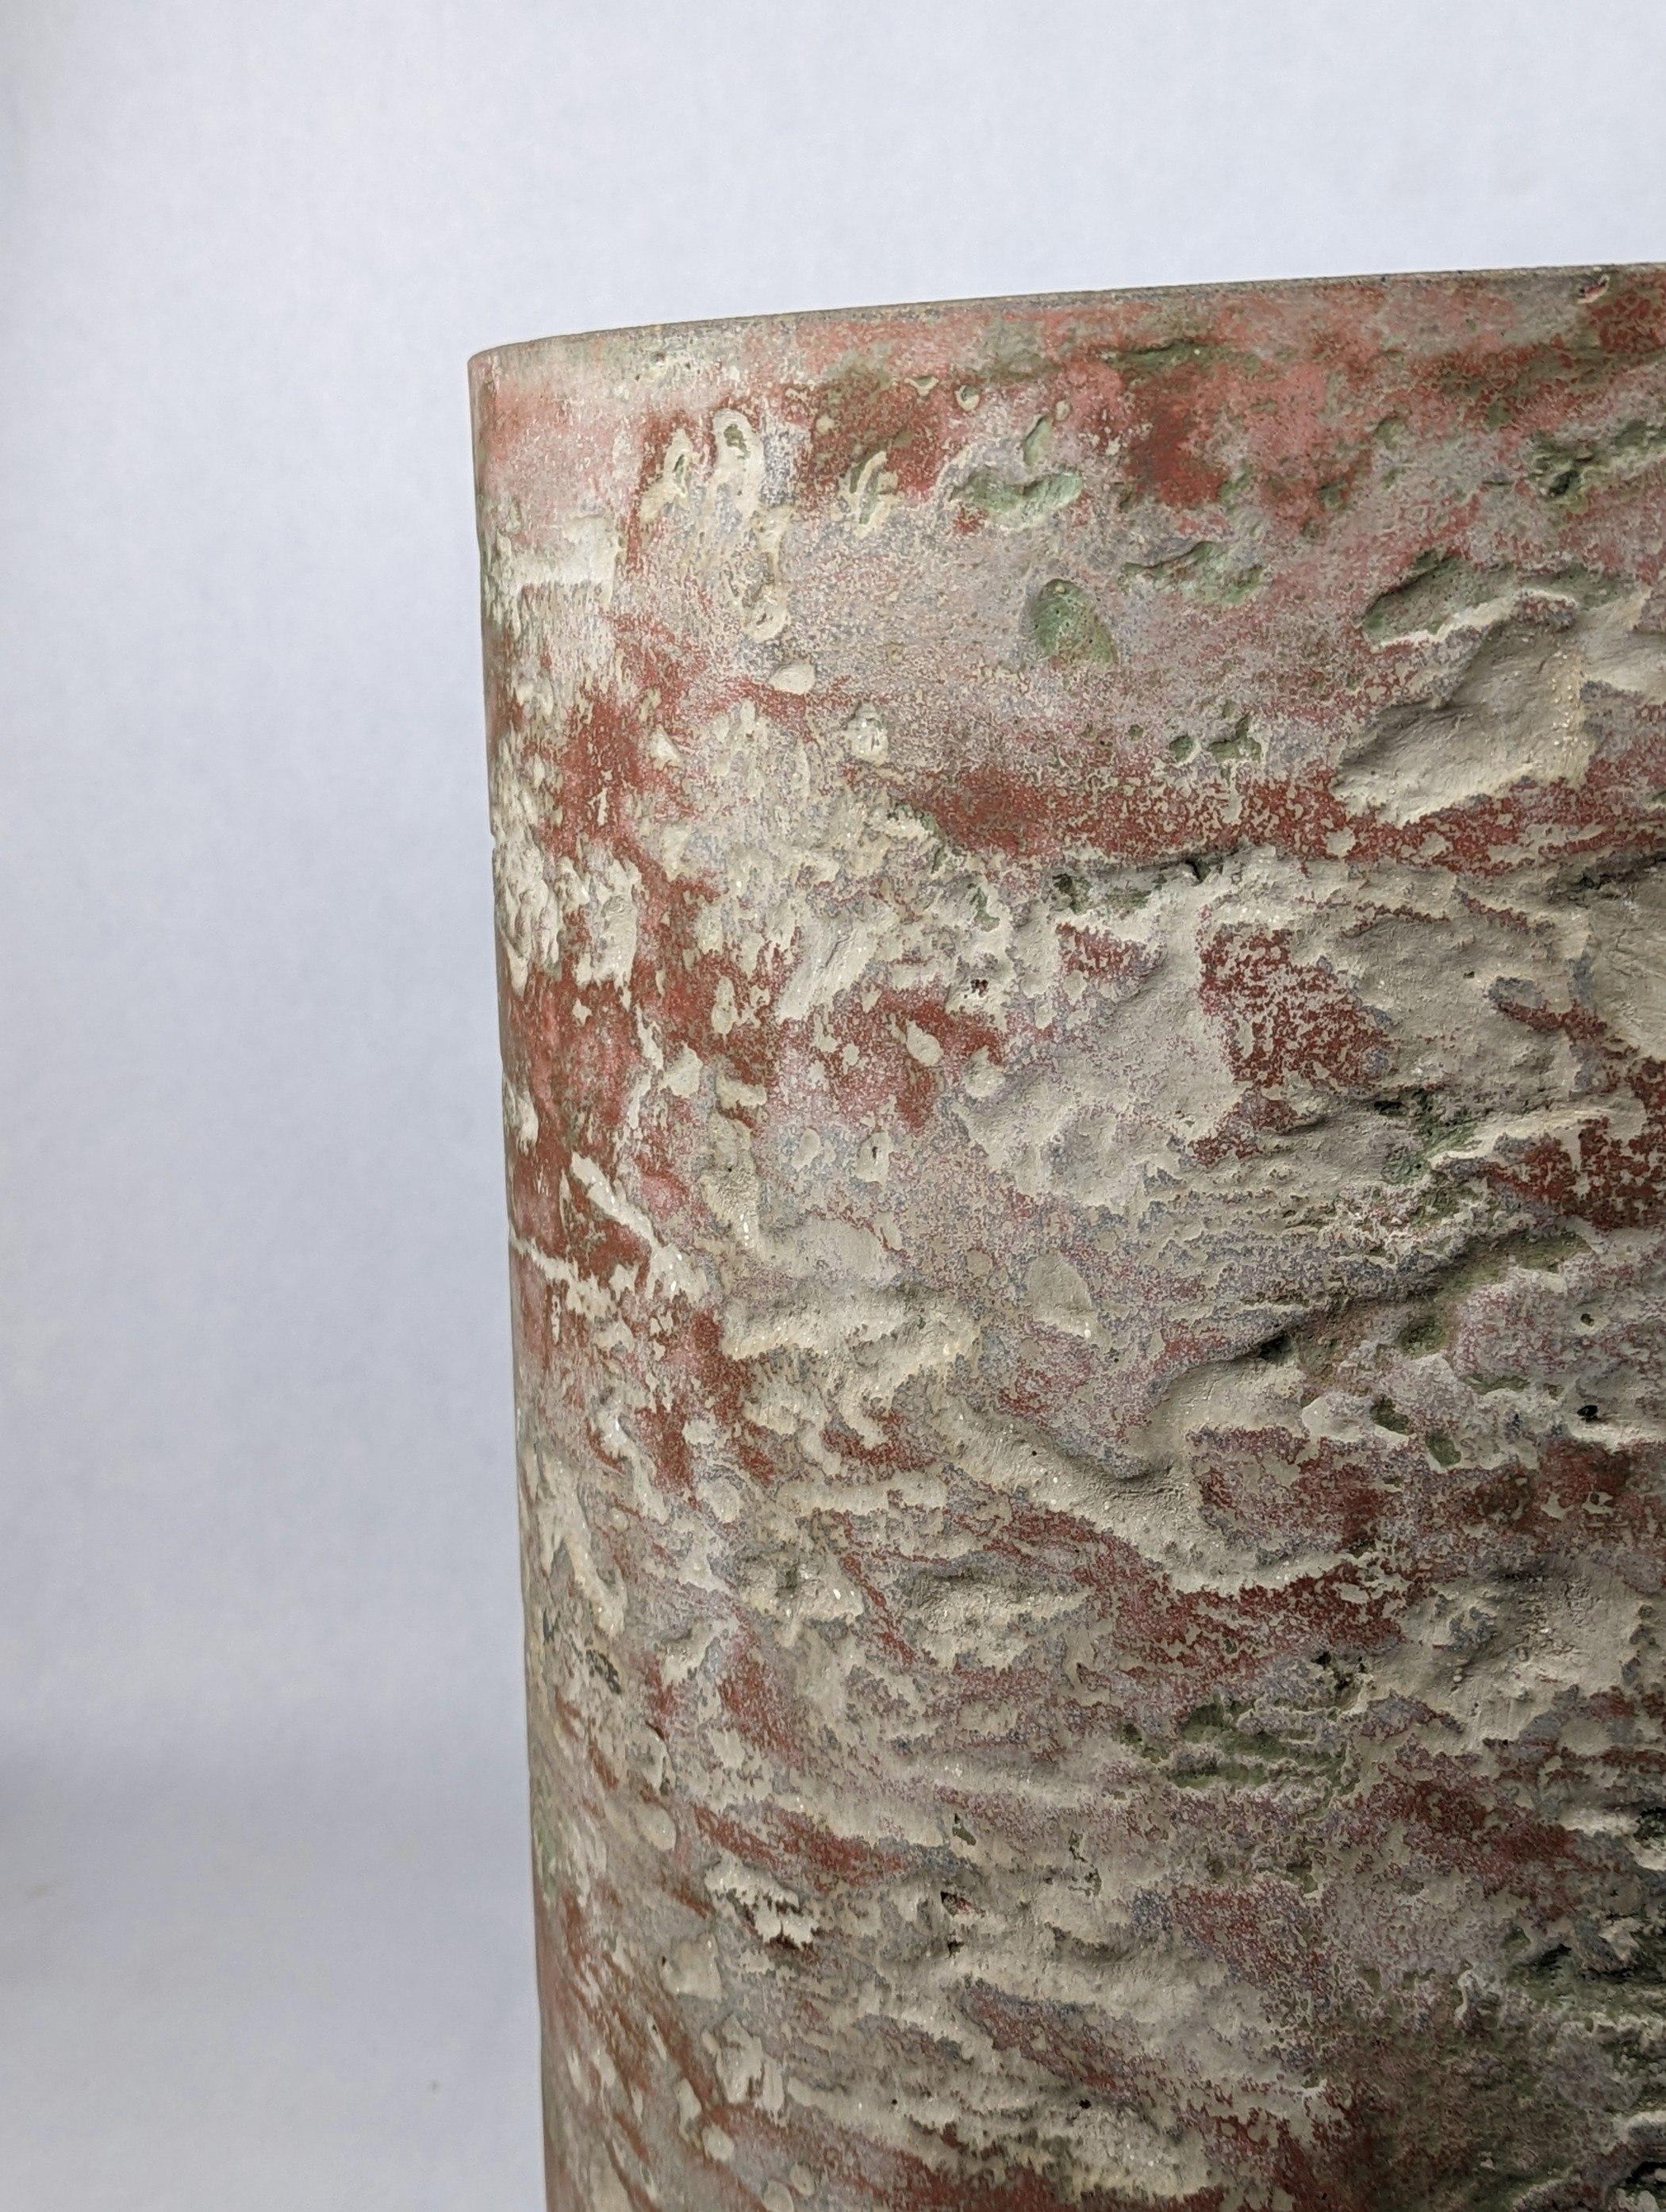 Cast Geological Light MTO Red and Green Concrete Art Stool, 'Lichen on Mars' For Sale